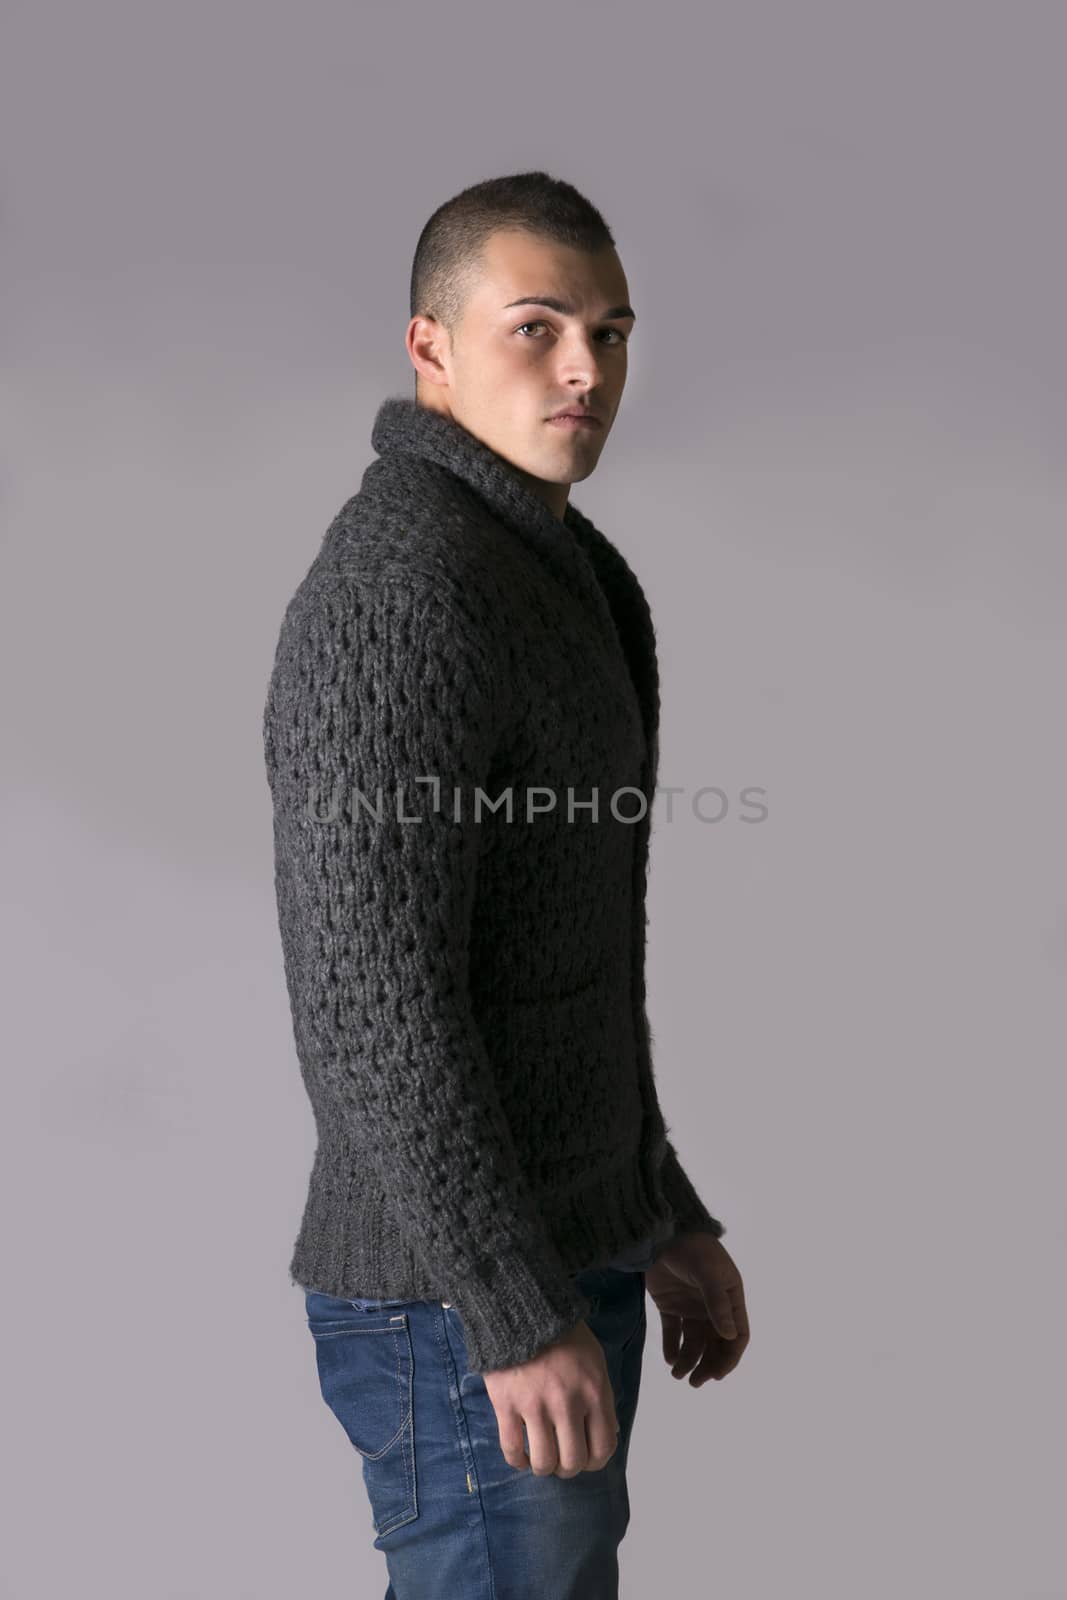 Attractive young man with wool sweater and jeans, isolated on grey background